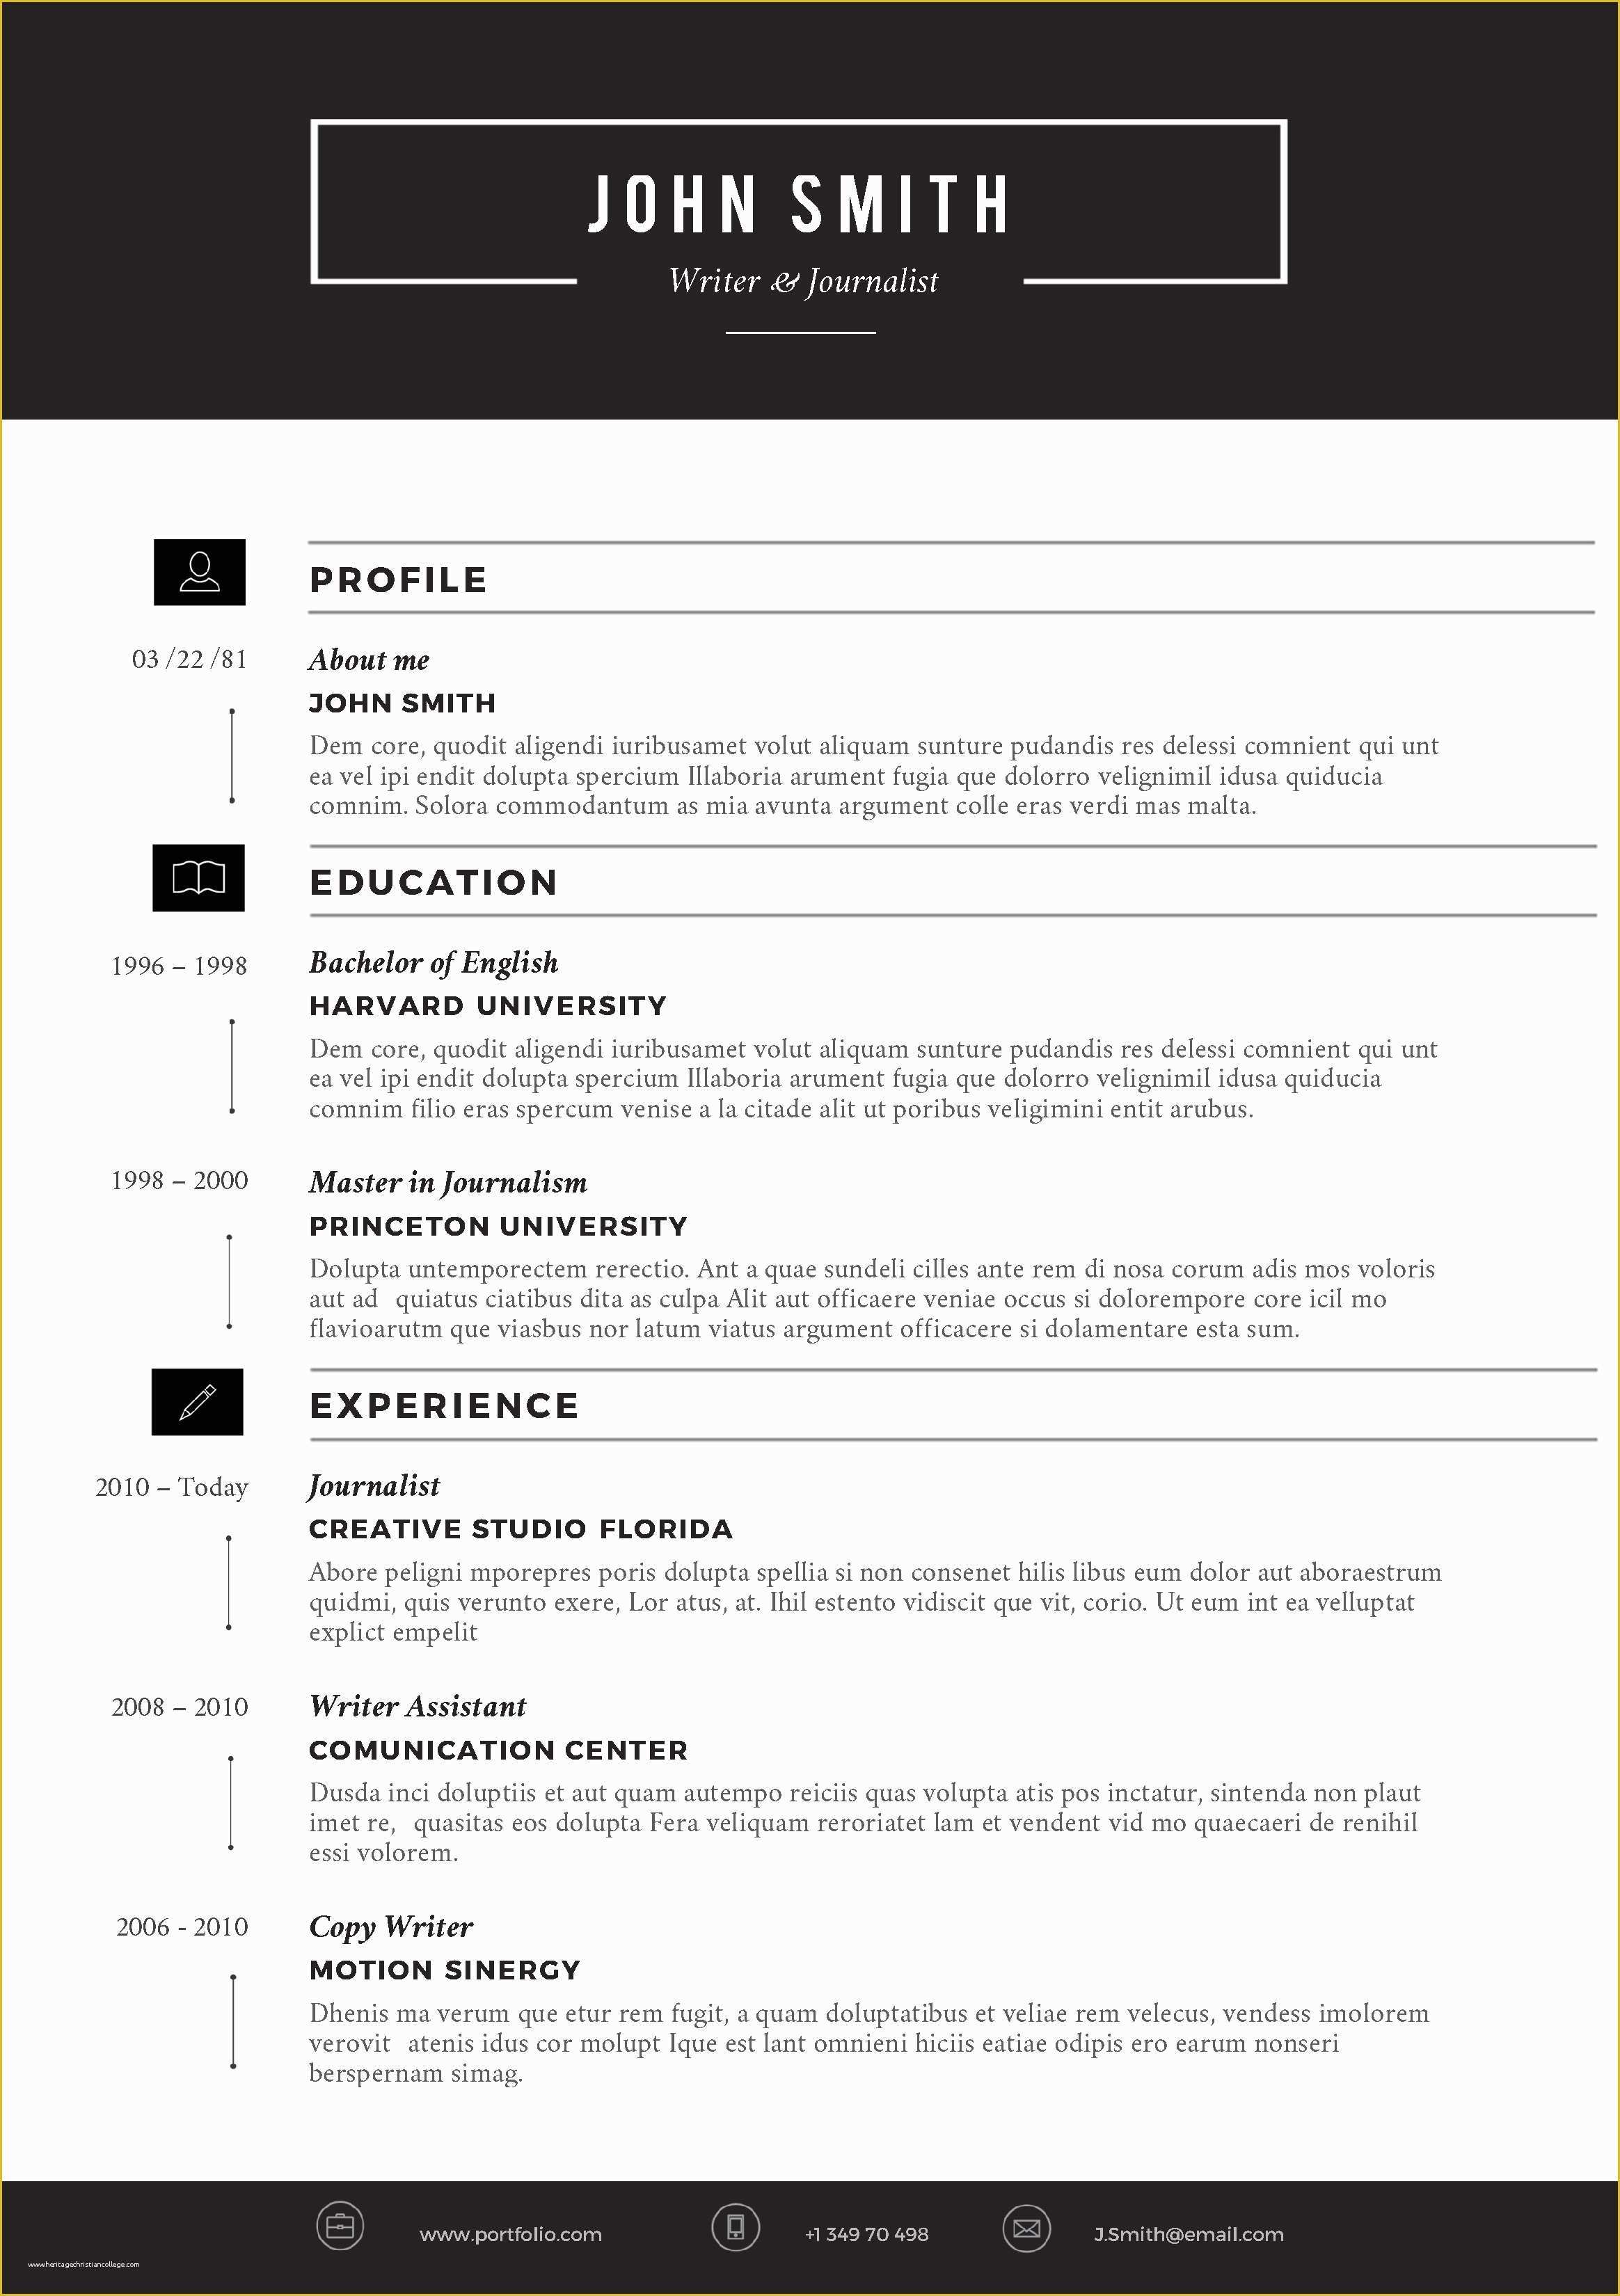 Creative Resume Templates Free Download Word Of Creative Resume Template by Cvfolio Resumes